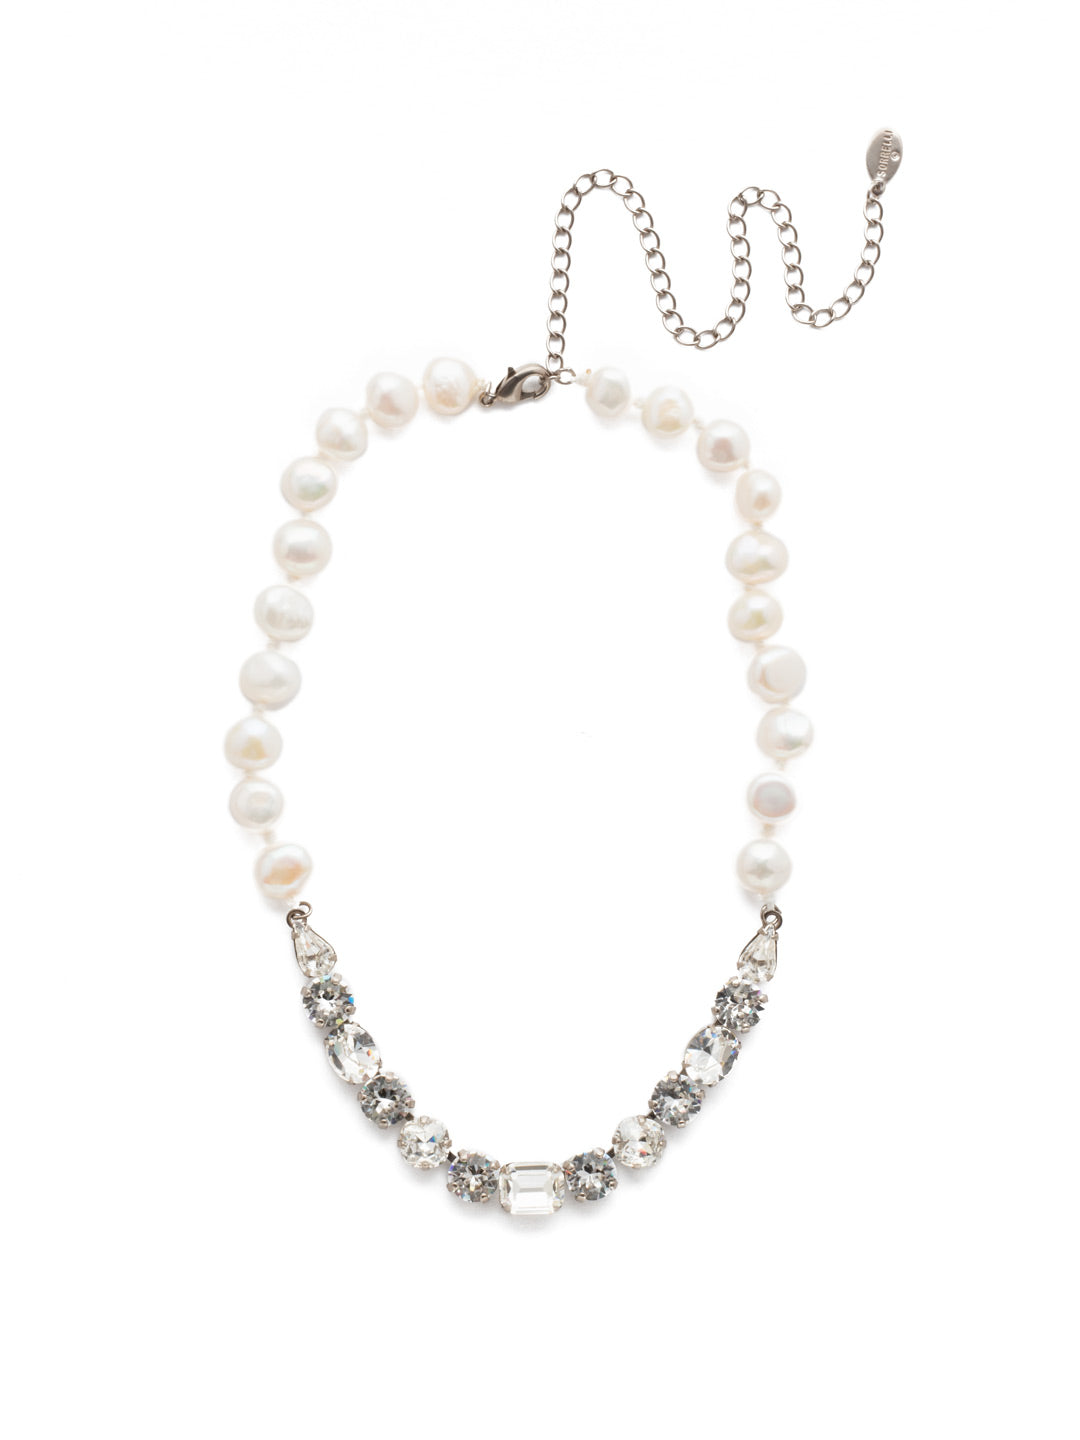 Cadenza Tennis Necklace - NEC14ASCRY - <p>This classic beauty features a chain of wire-wrapped freshwater pearls supporting a delicate pattern of crystal shapes at its base. From Sorrelli's Crystal collection in our Antique Silver-tone finish.</p>